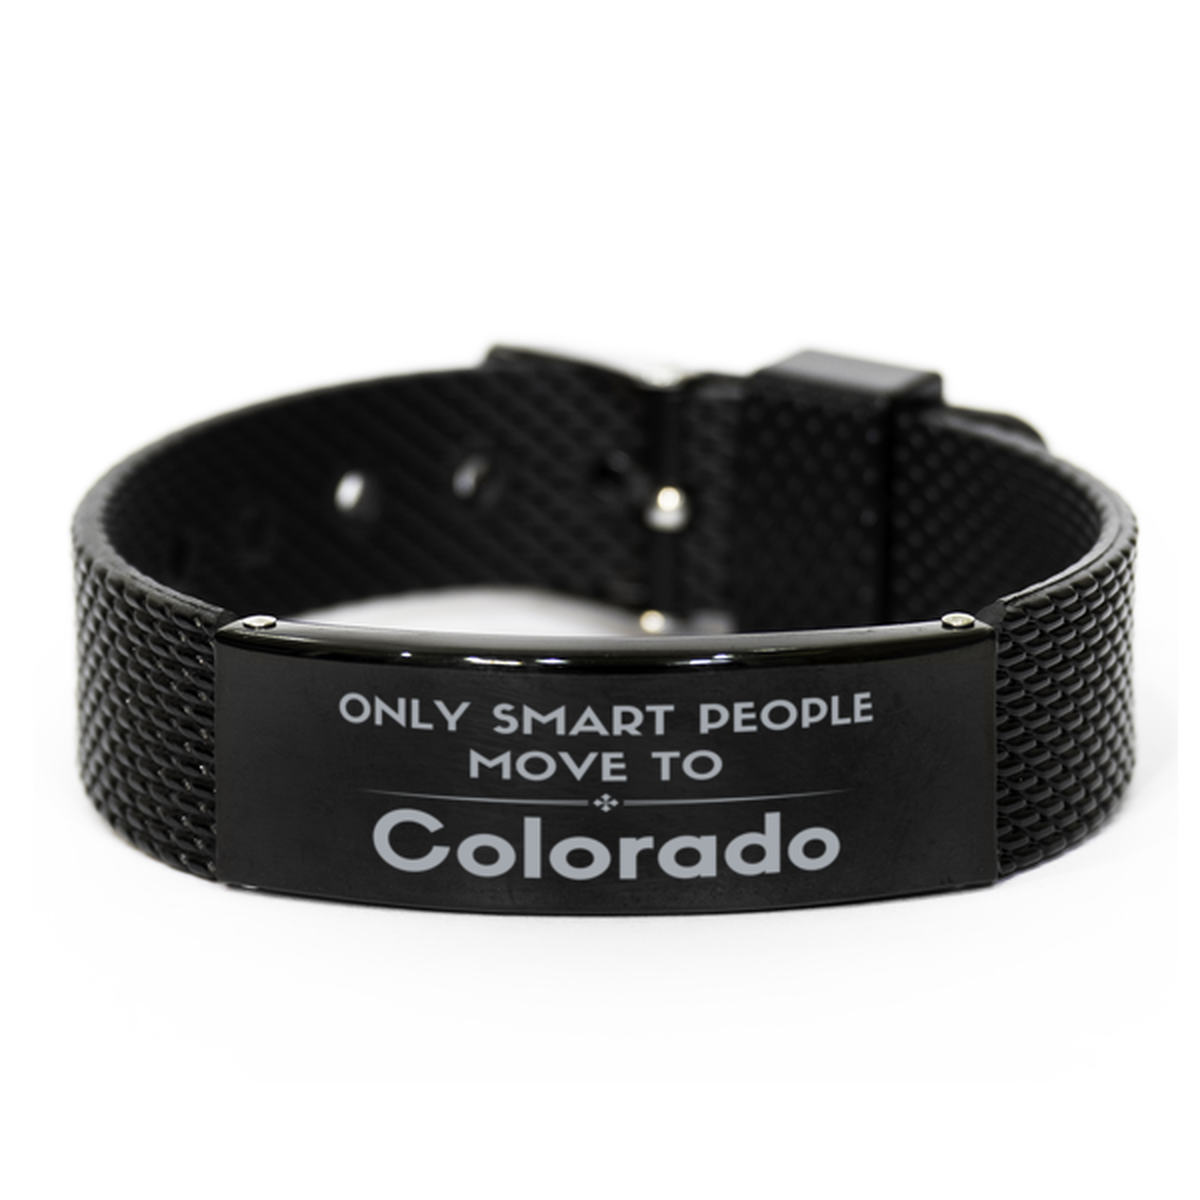 Only smart people move to Colorado Black Shark Mesh Bracelet, Gag Gifts For Colorado, Move to Colorado Gifts for Friends Coworker Funny Saying Quote